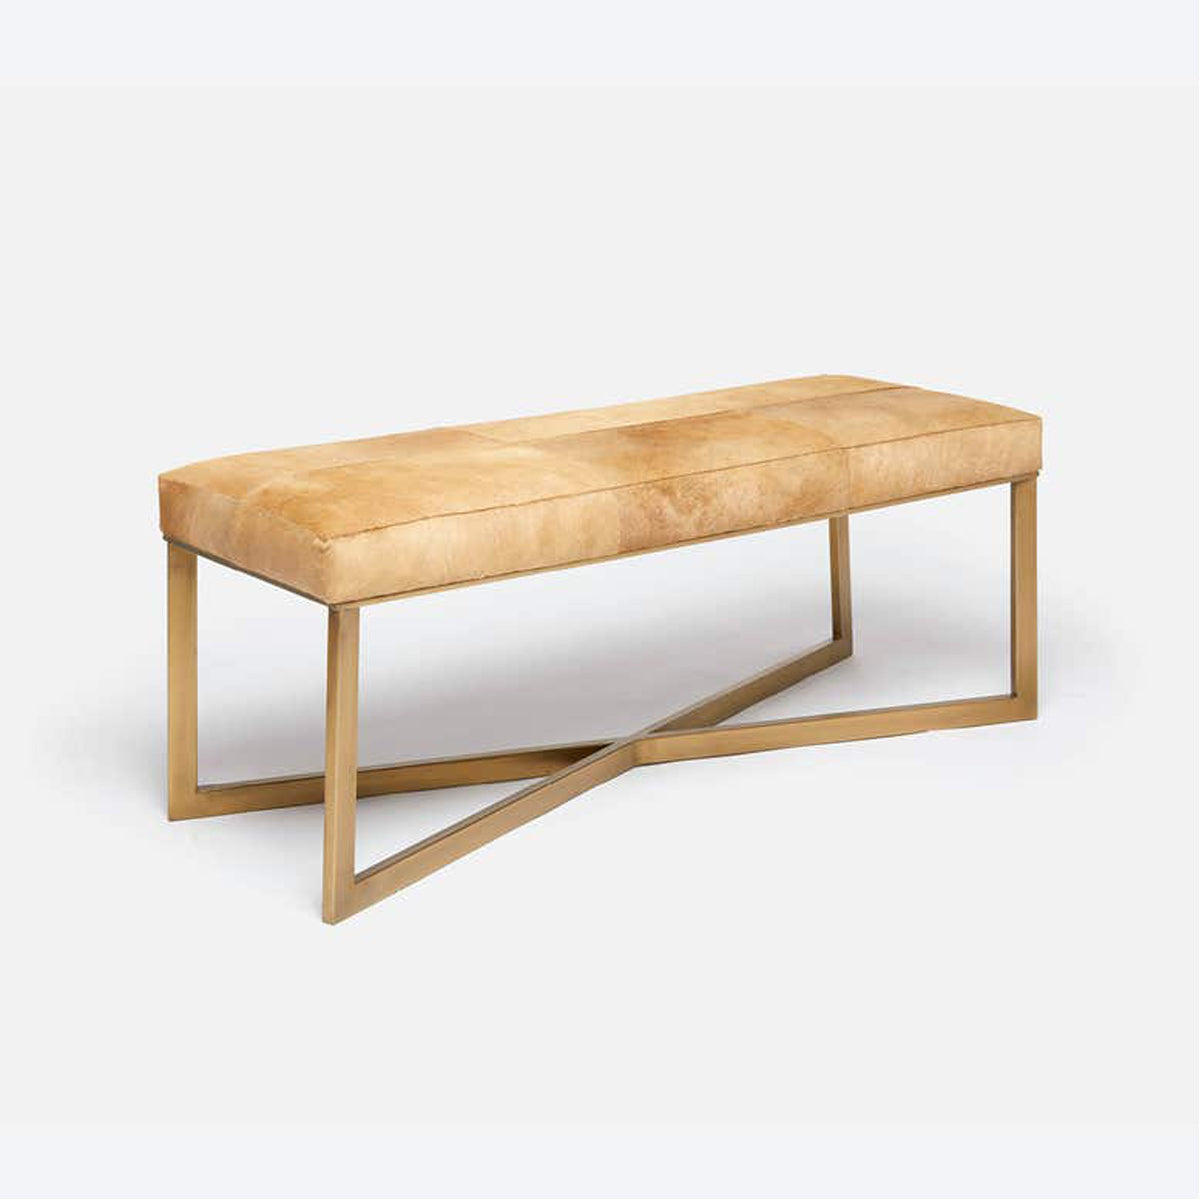 Made Goods Roger Cowhide Double Bench in Weser Fabric